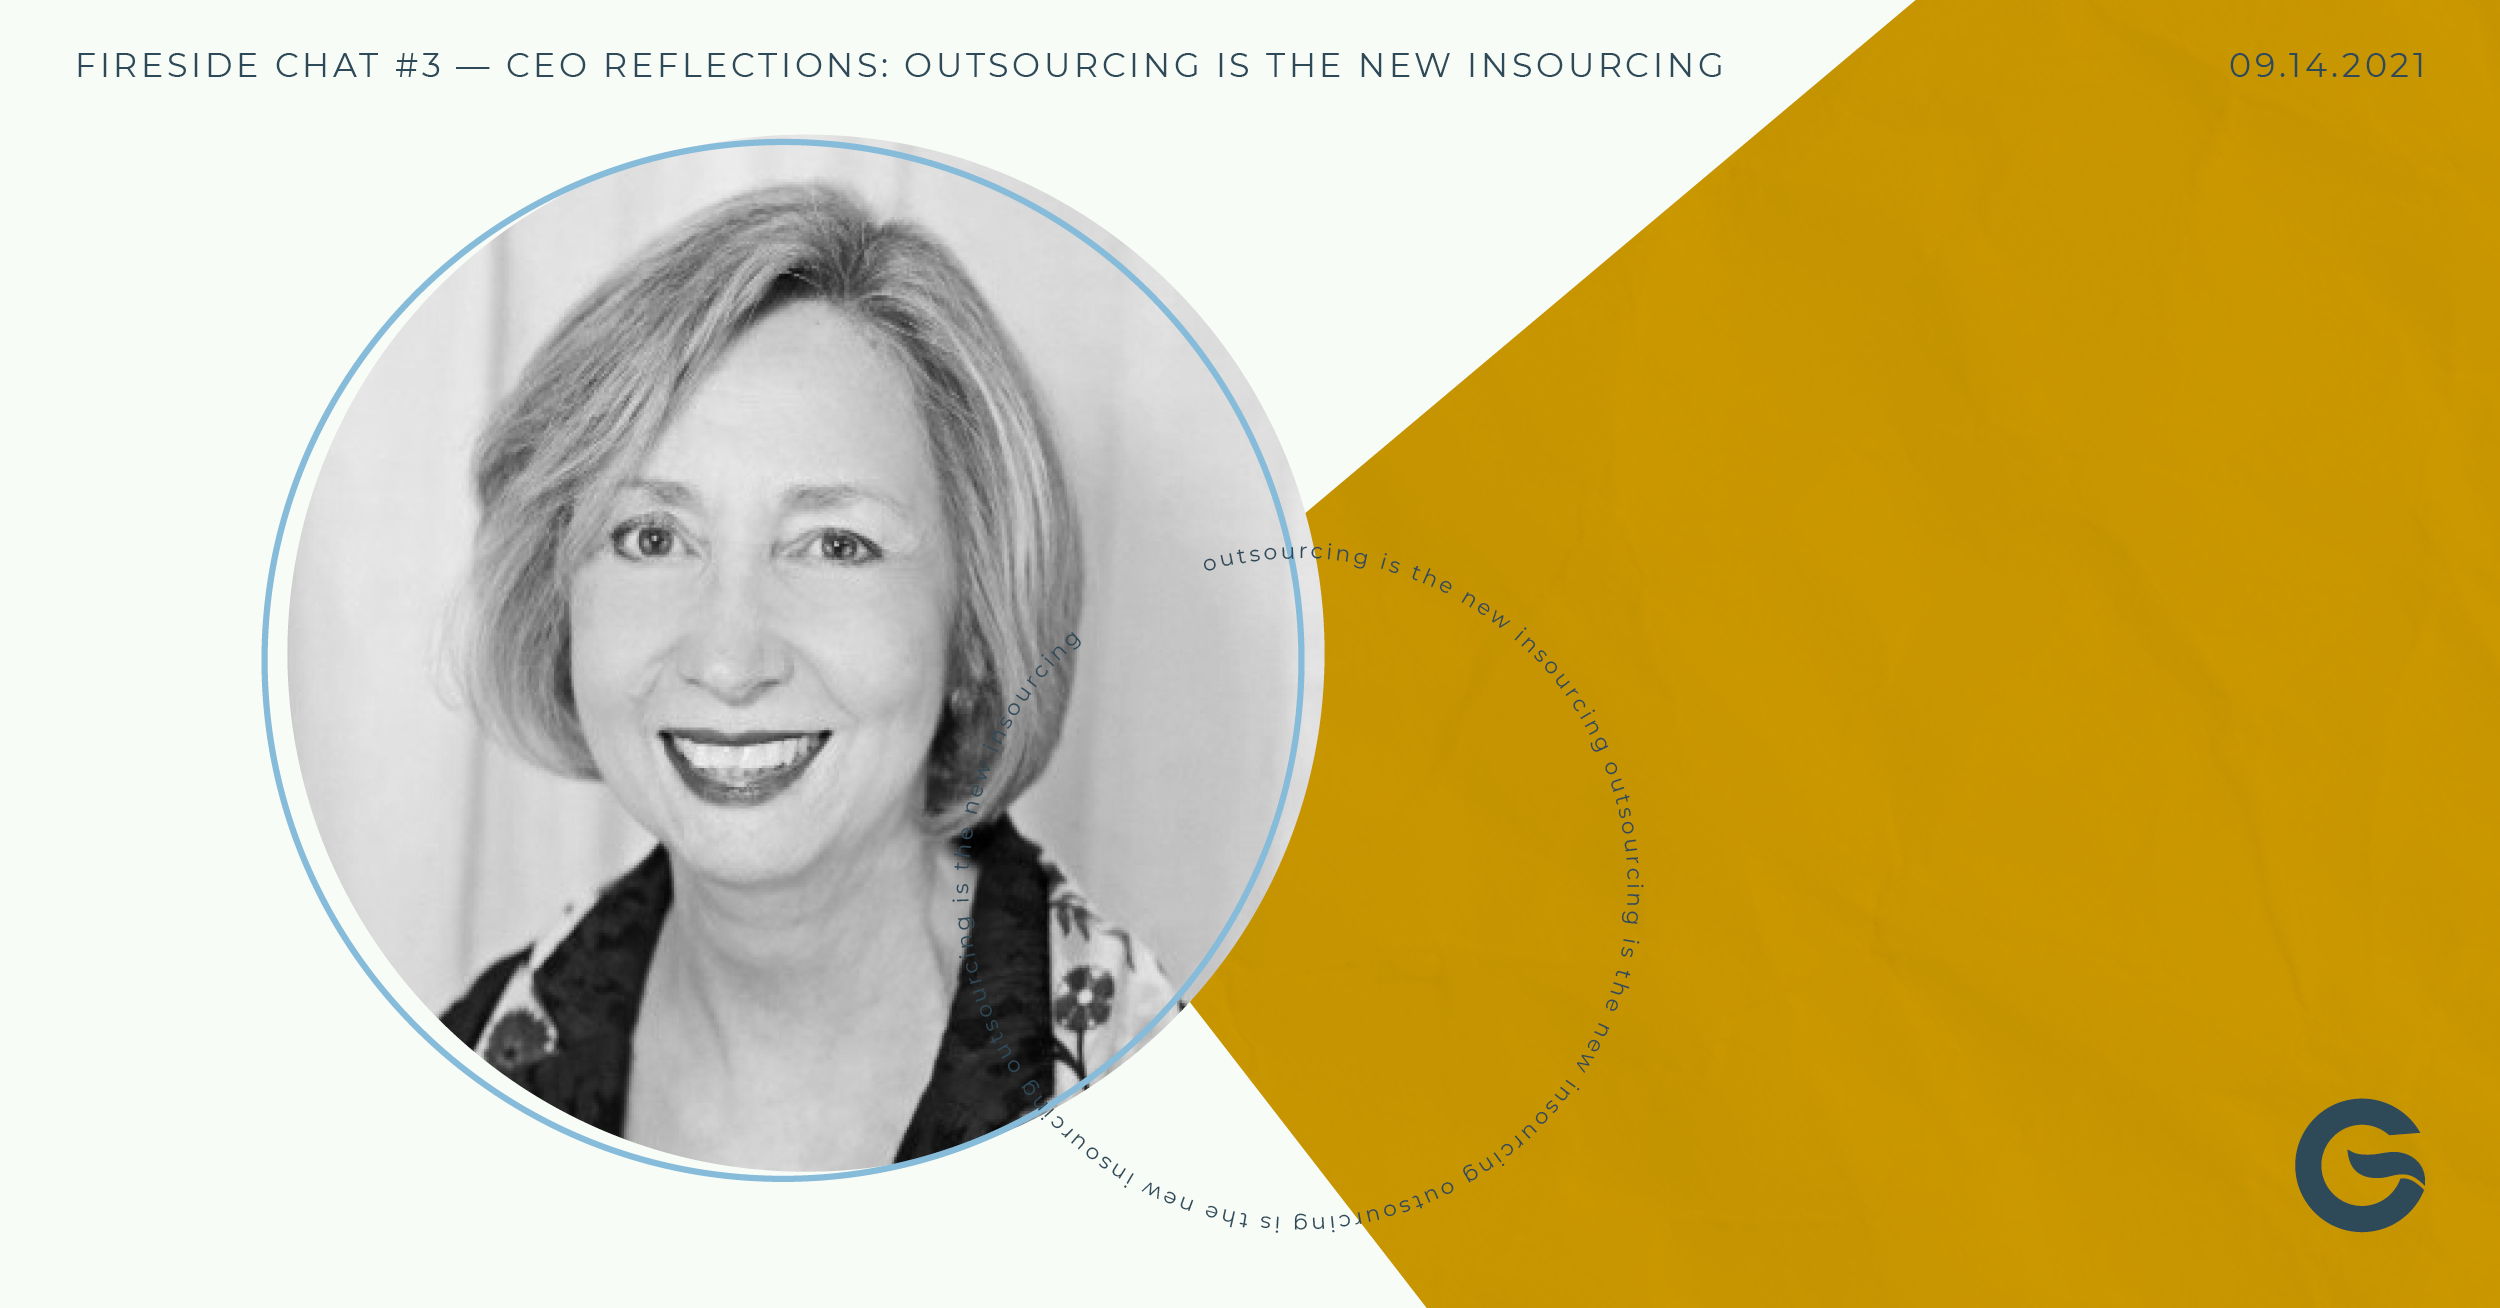 Fireside Chat #3 - CEO Reflections: Outsourcing is the New Insourcing Image